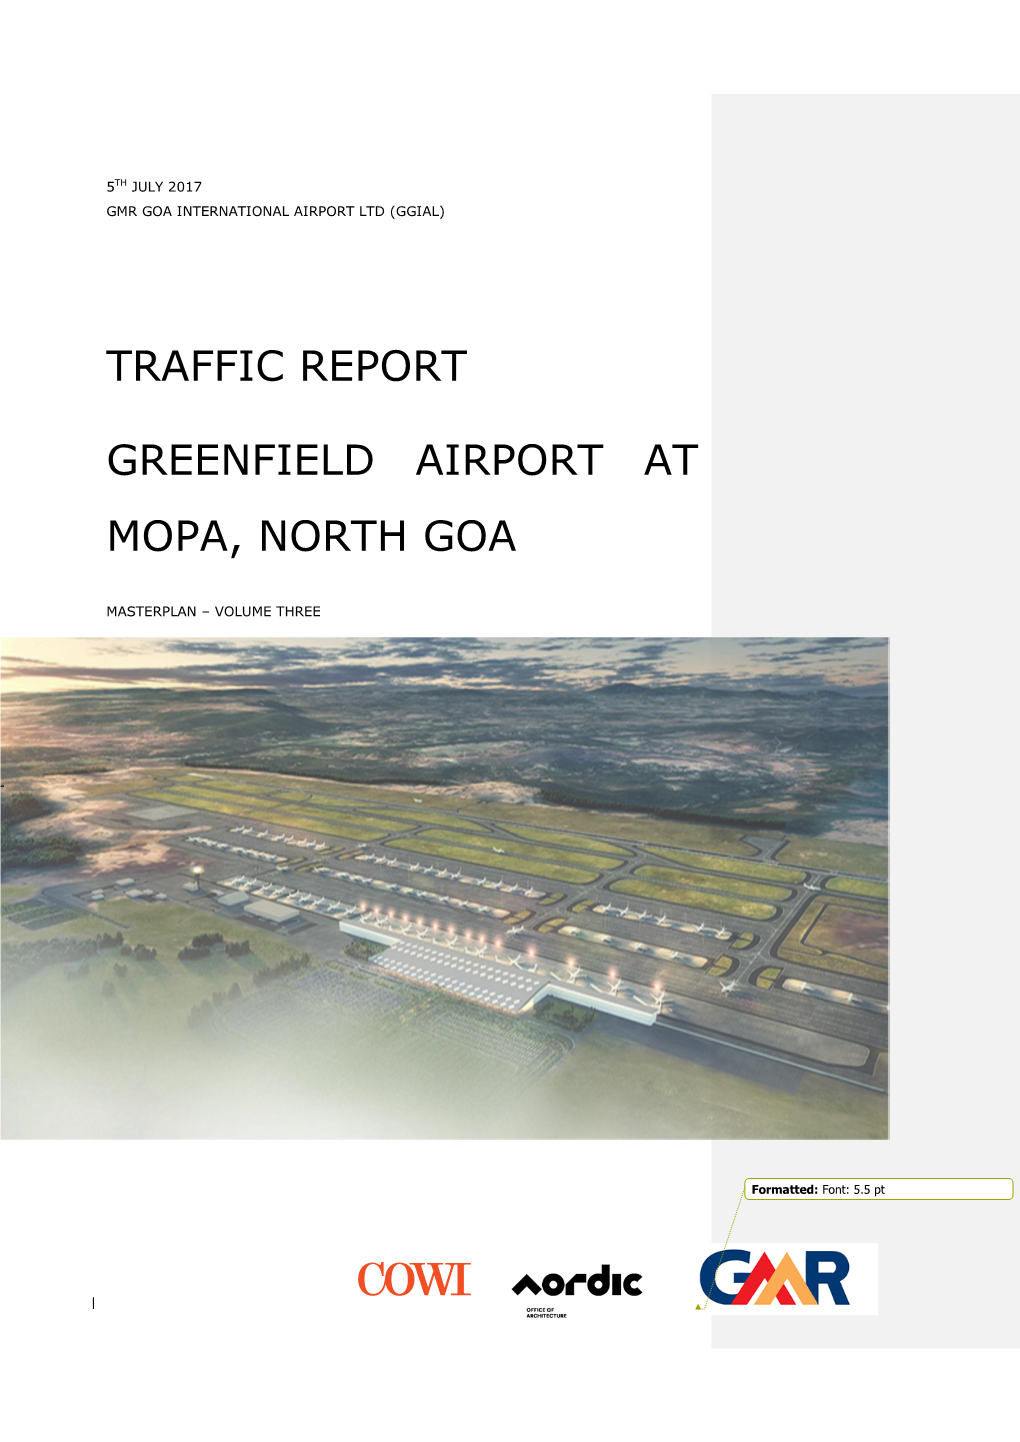 Traffic Report Greenfield Airport at Mopa, North